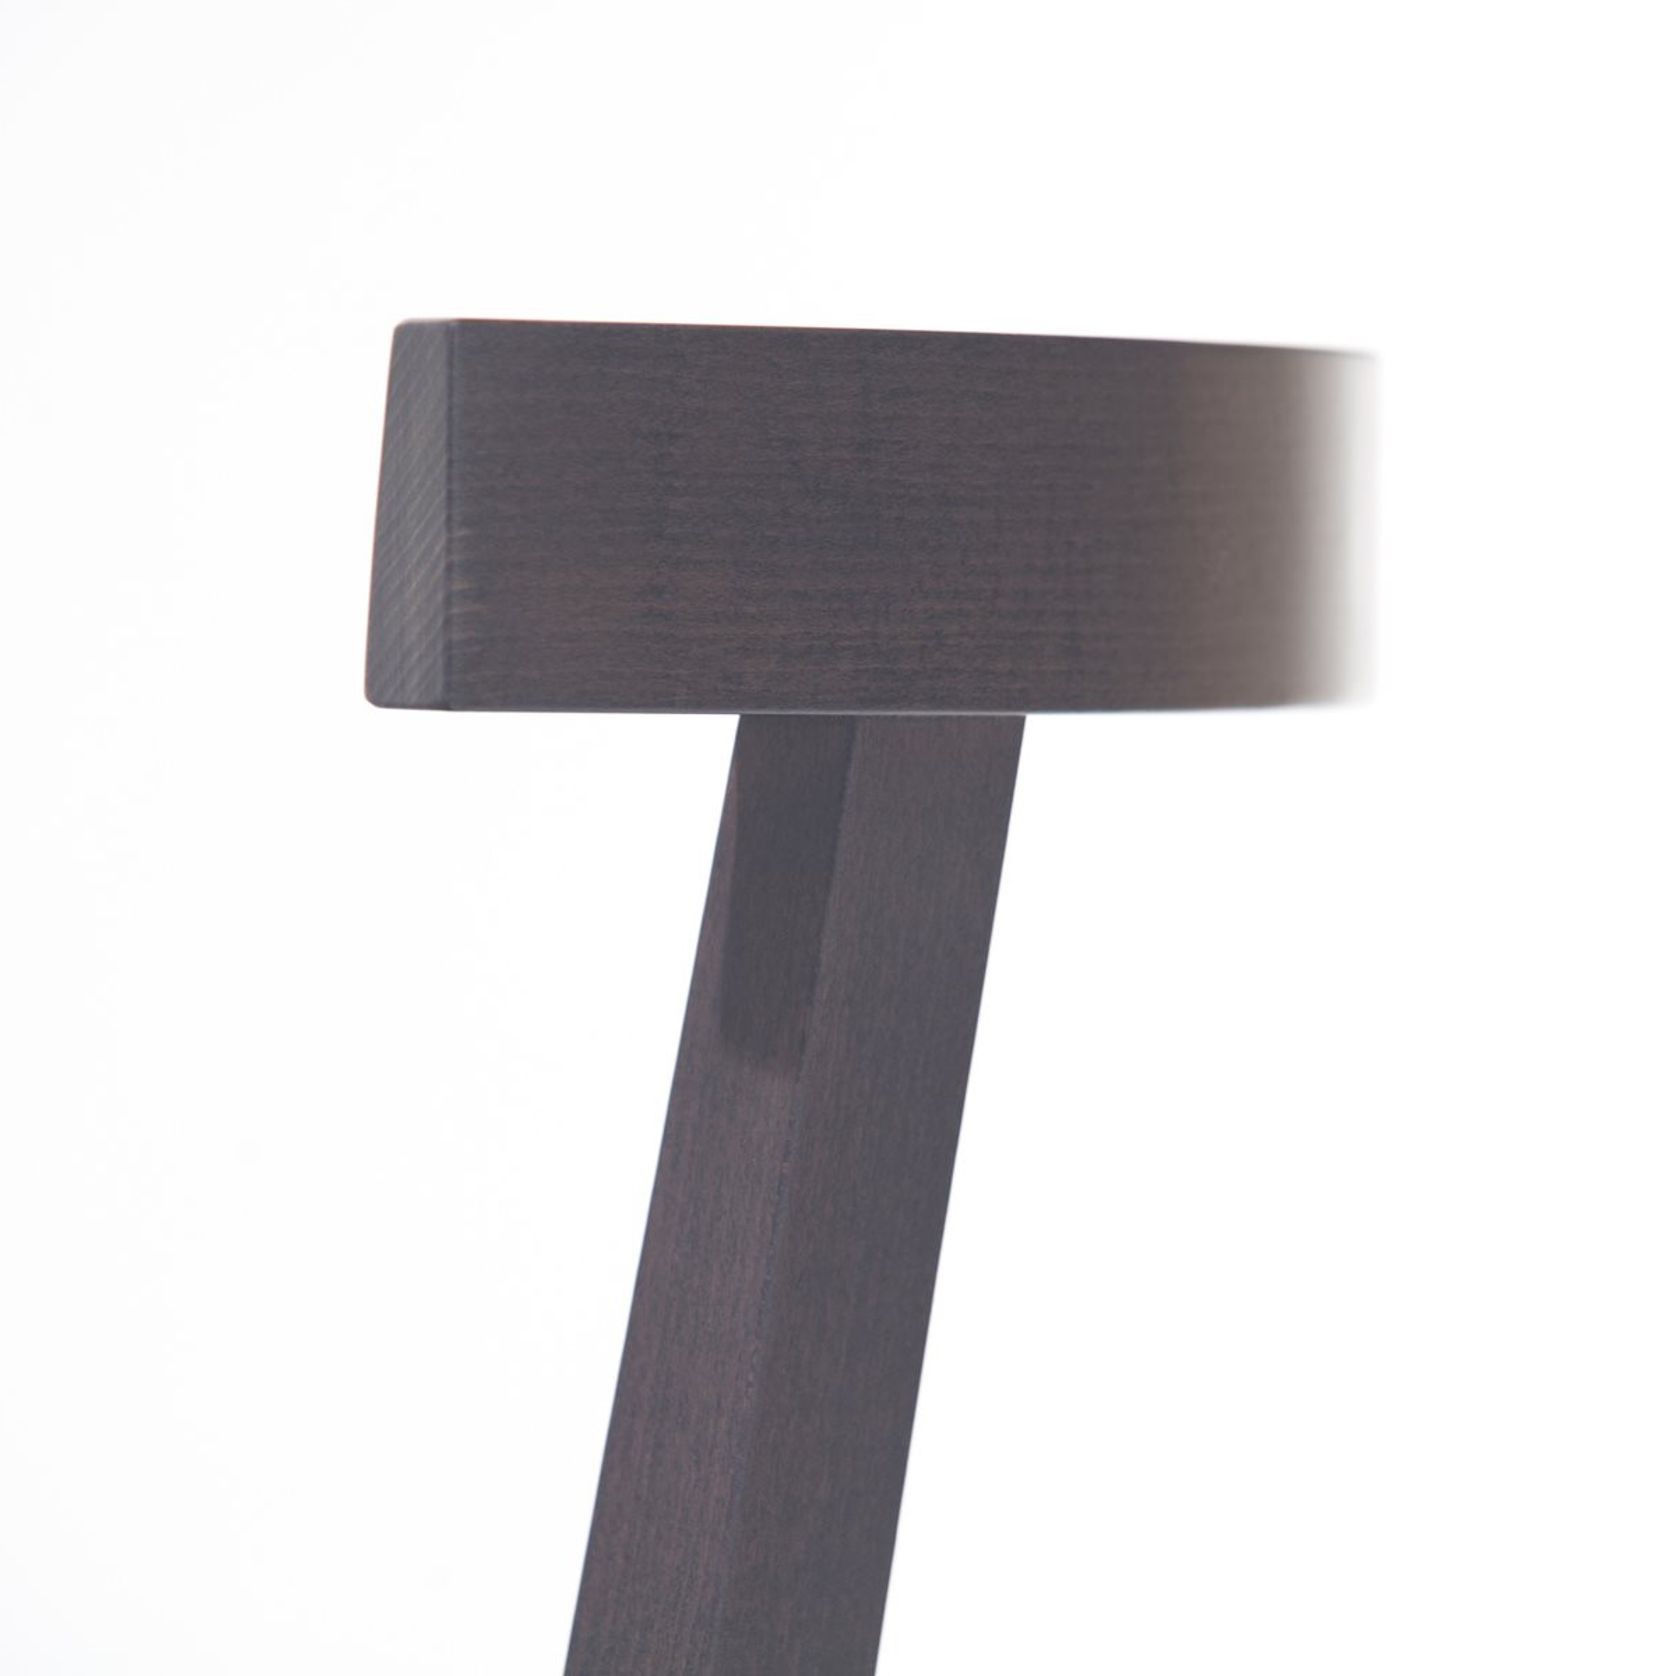 Punton Chair by TON gallery detail image